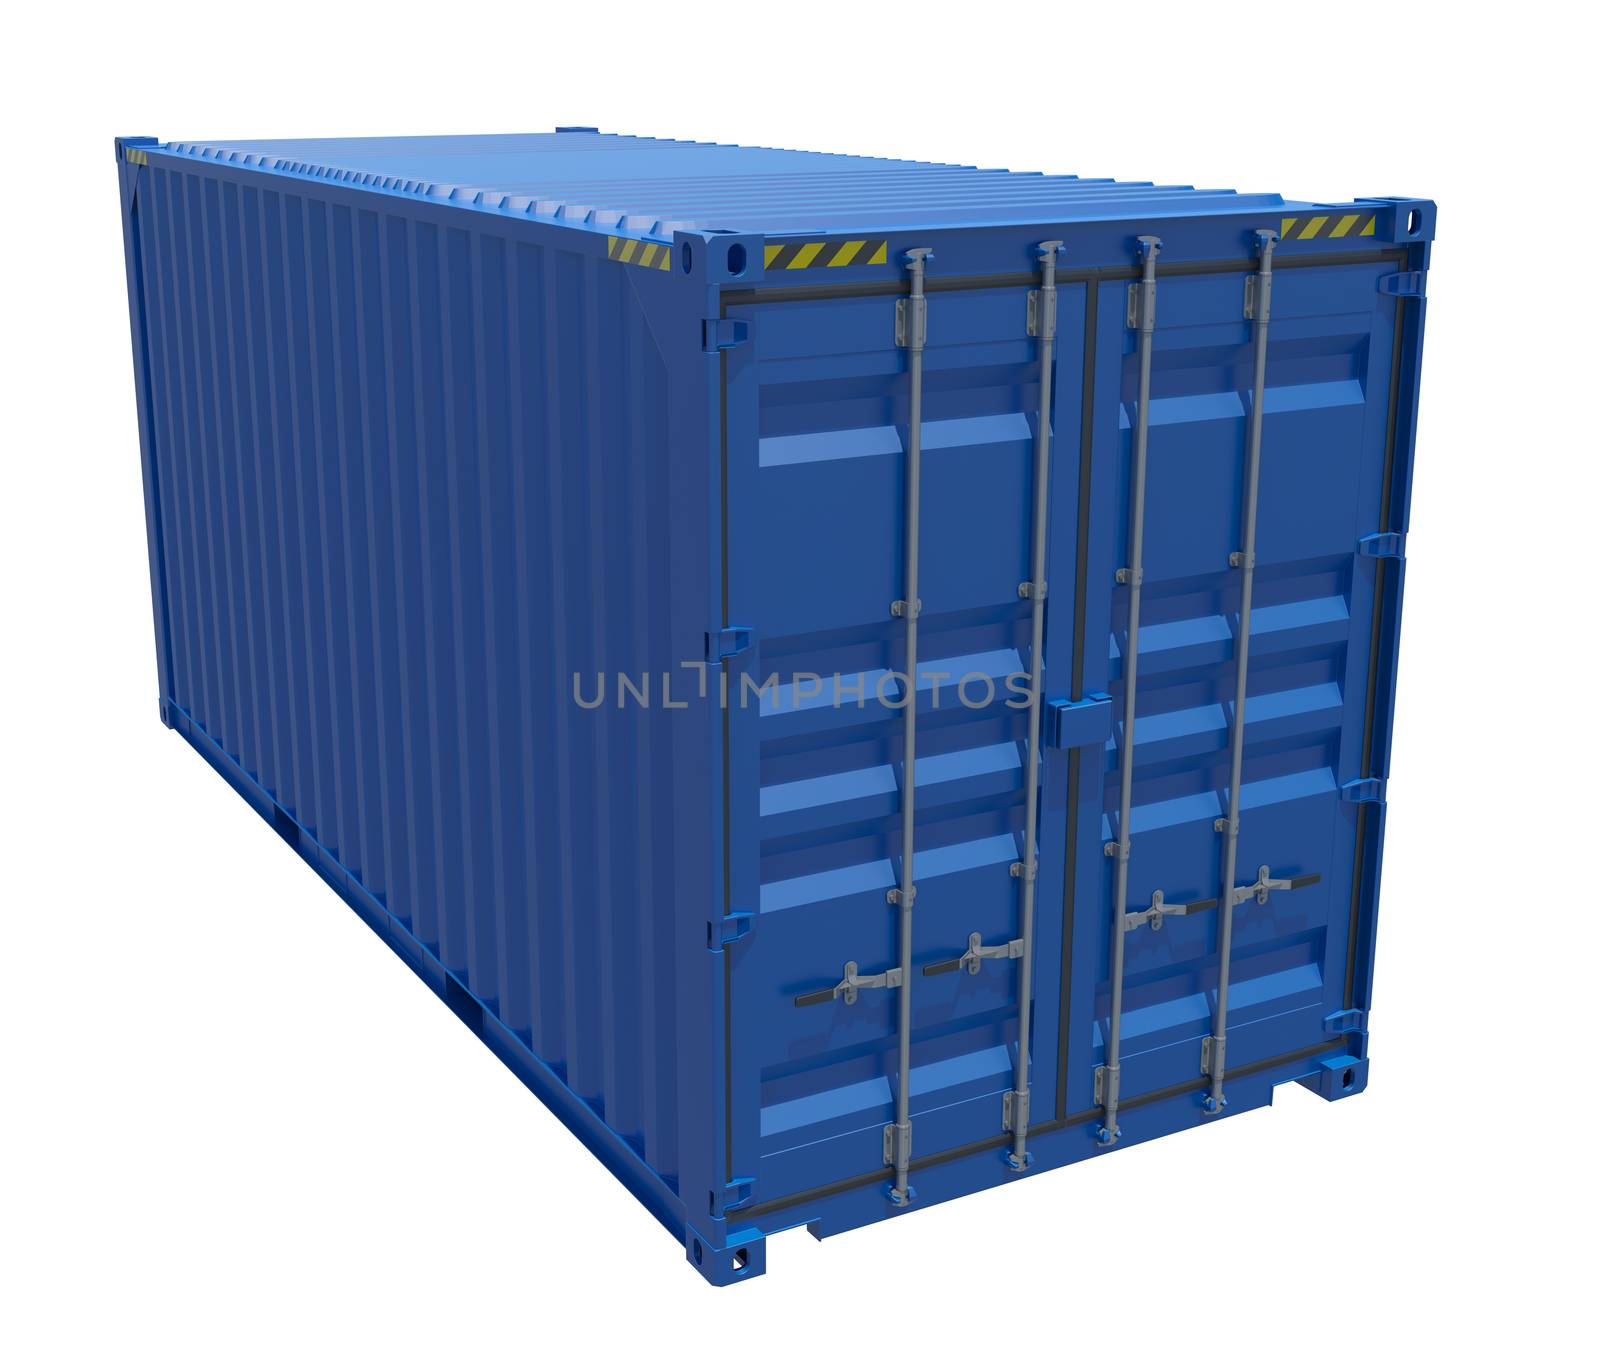 3d rendering of blue shipping container. Isolated on white